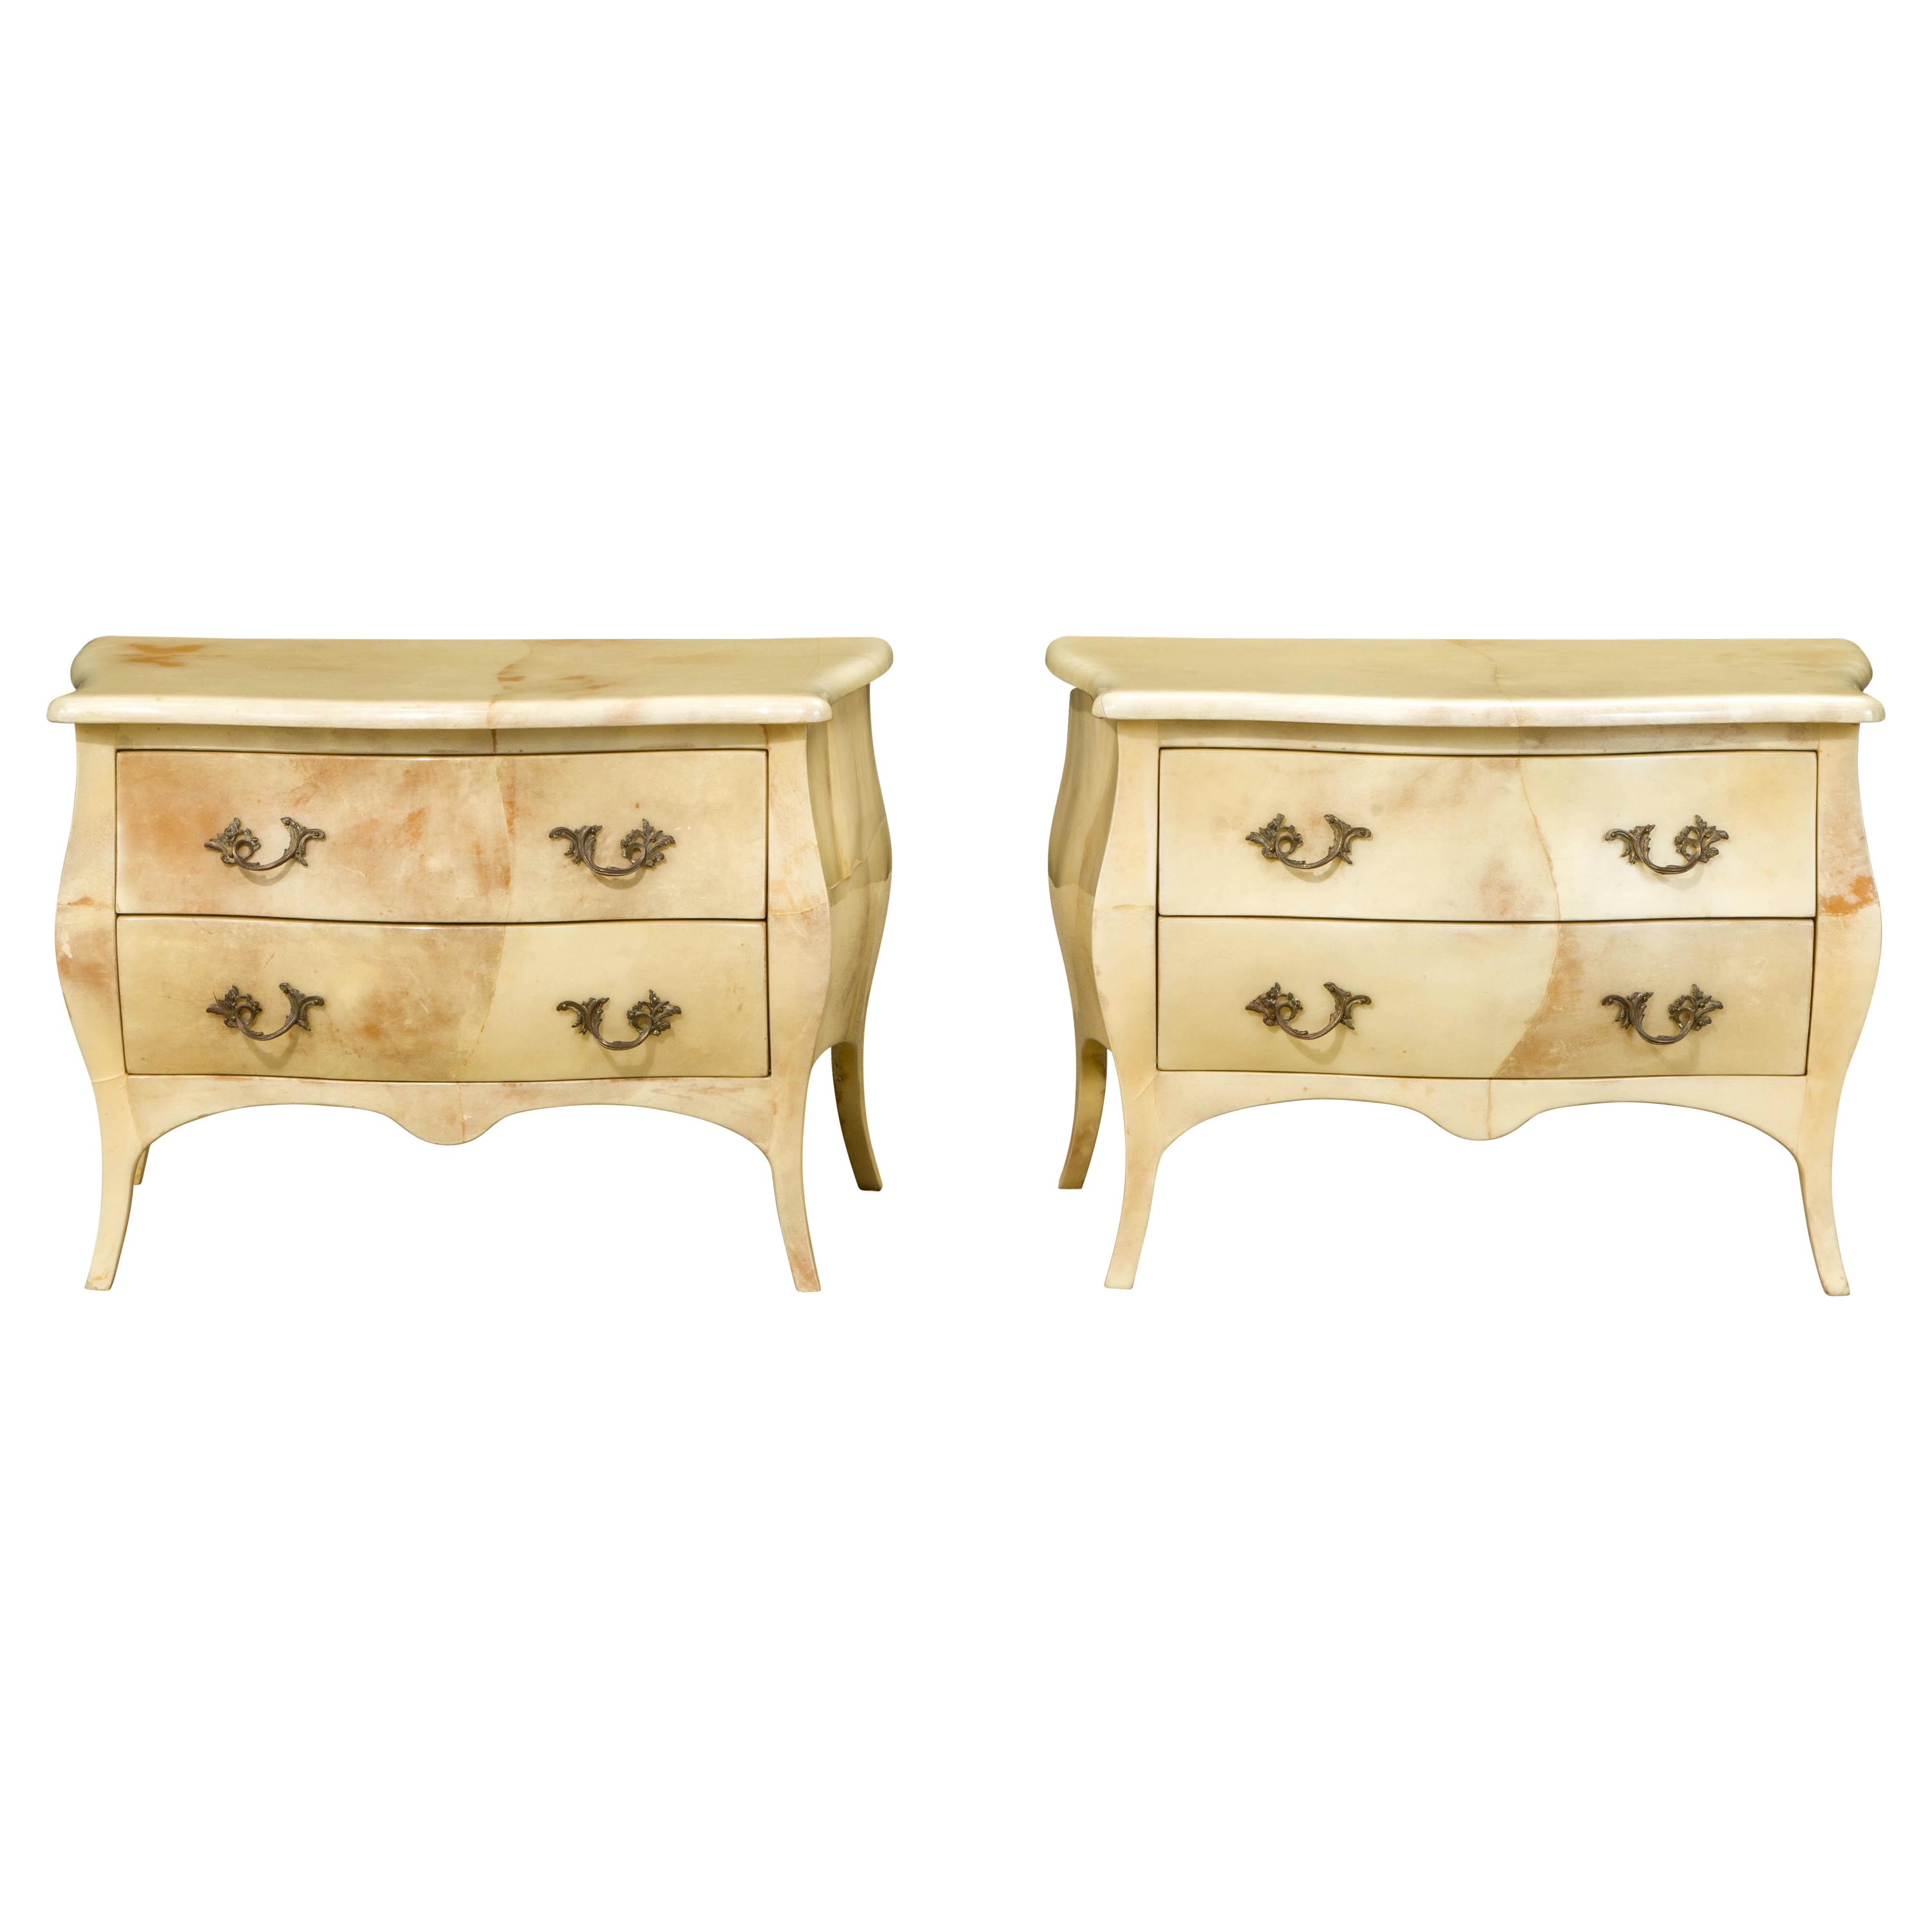 Enrique Garcel Large Lacquered Goatskin and Brass Nightstands, c 1970s, Signed For Sale